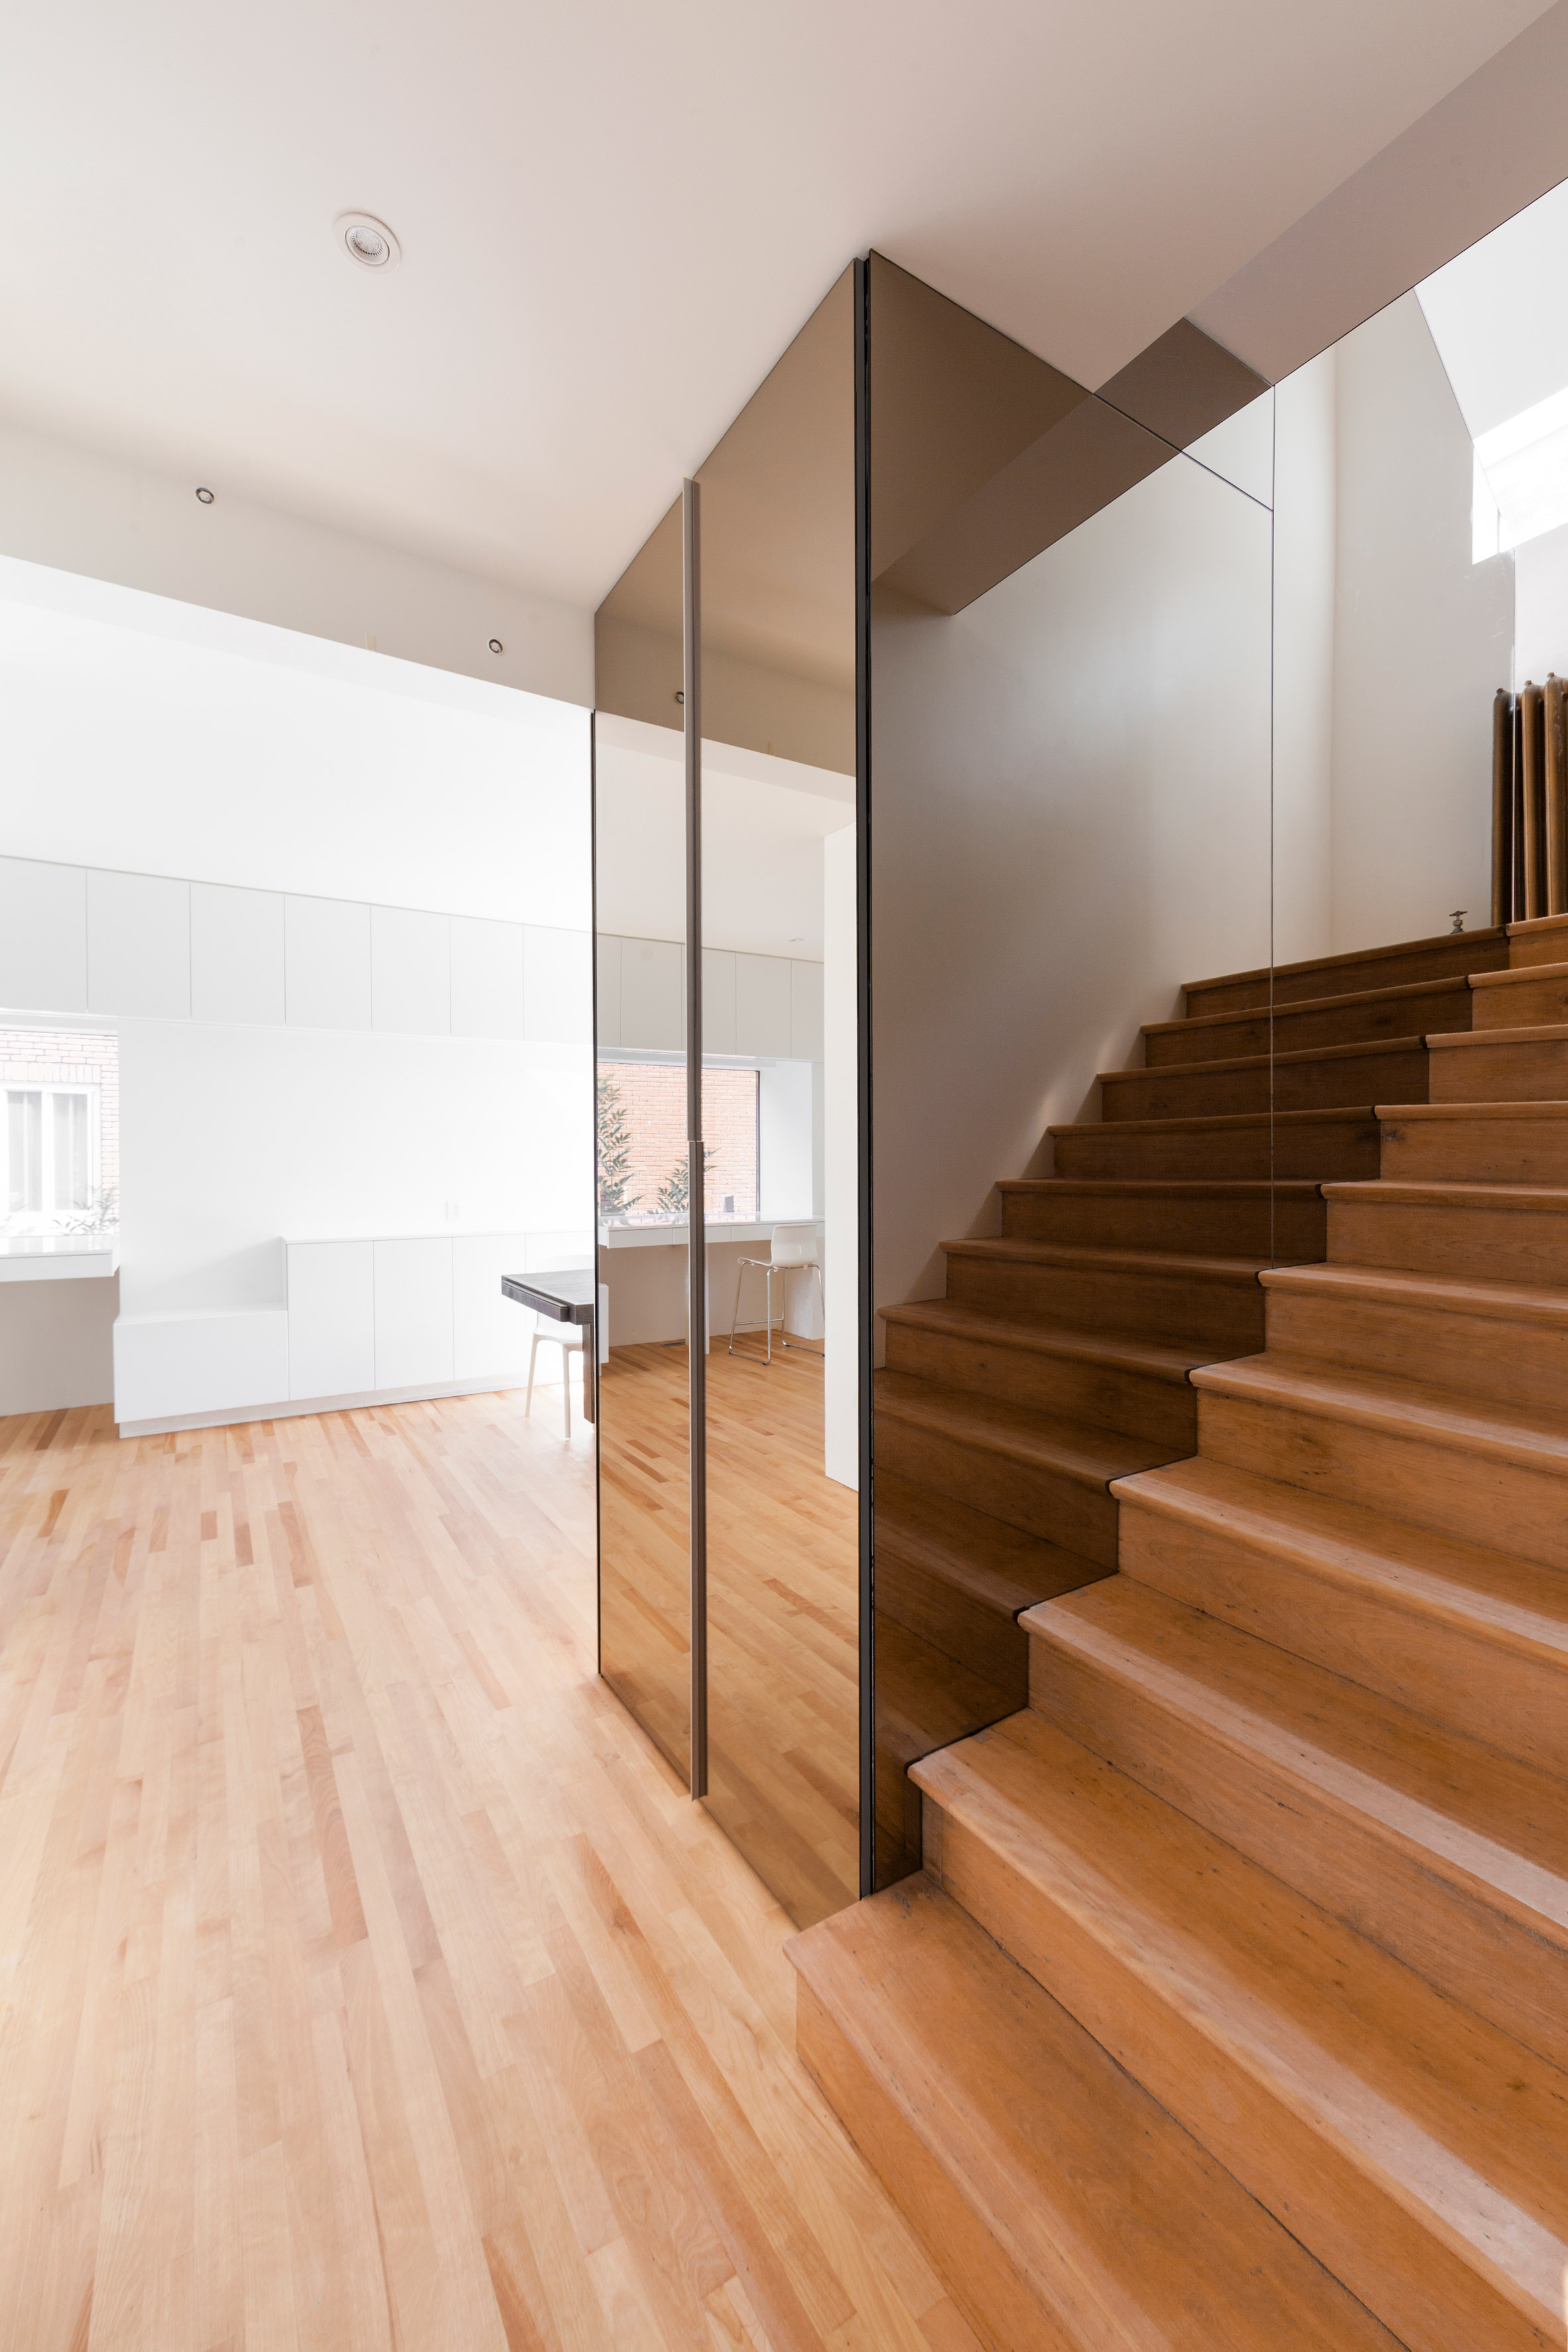 Jean-Maxime Labrecque adds mirrored staircase to Playful Tudor home in Montreal